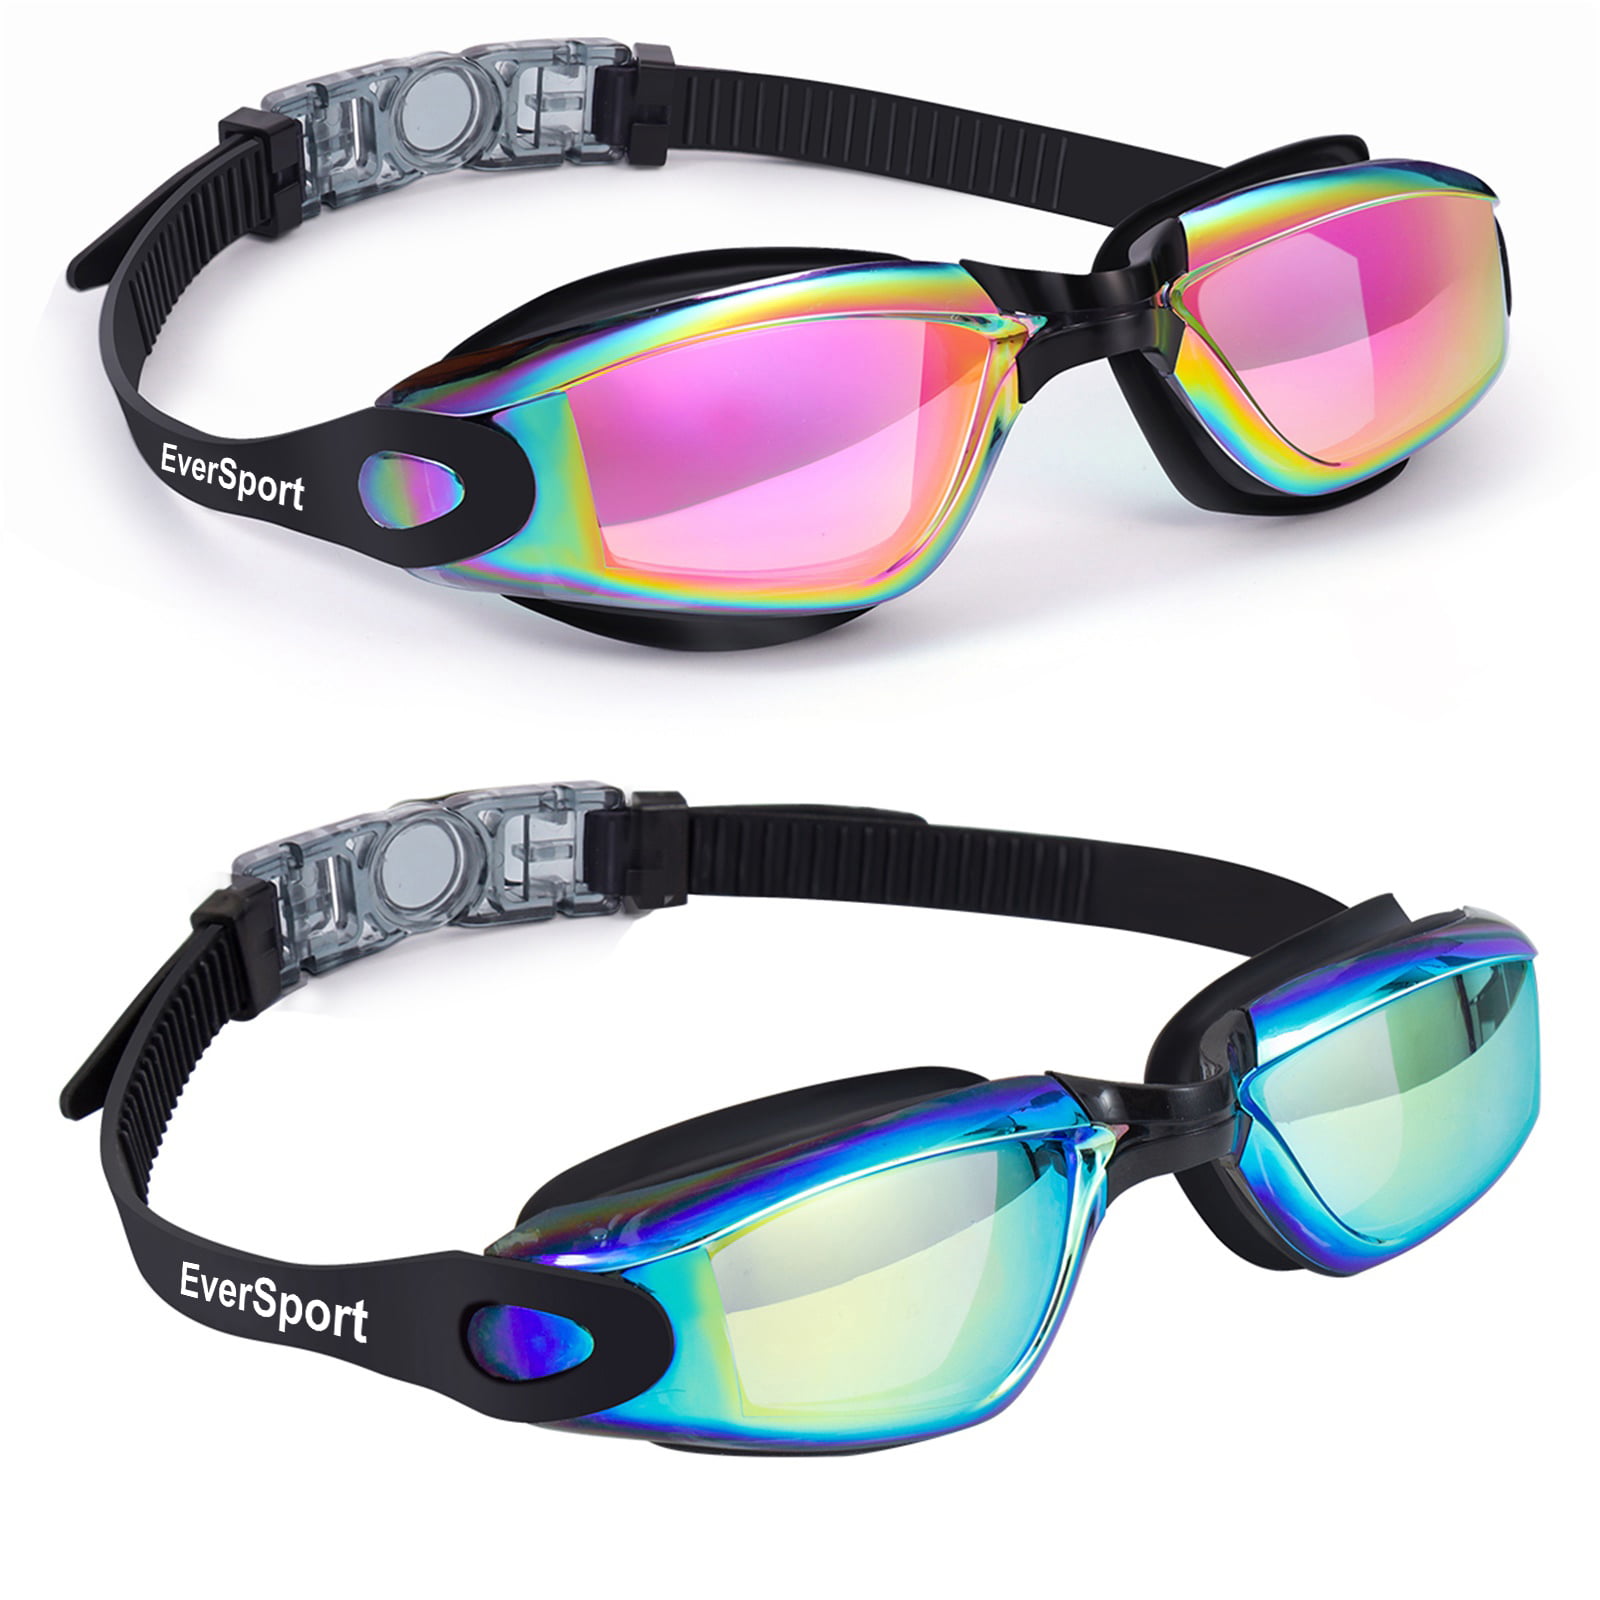 EverSport 2pack Swimming Goggles for Adult Comfortable Daily Swim Glasses with Mirrored Anti-Fog lens No Leak Water